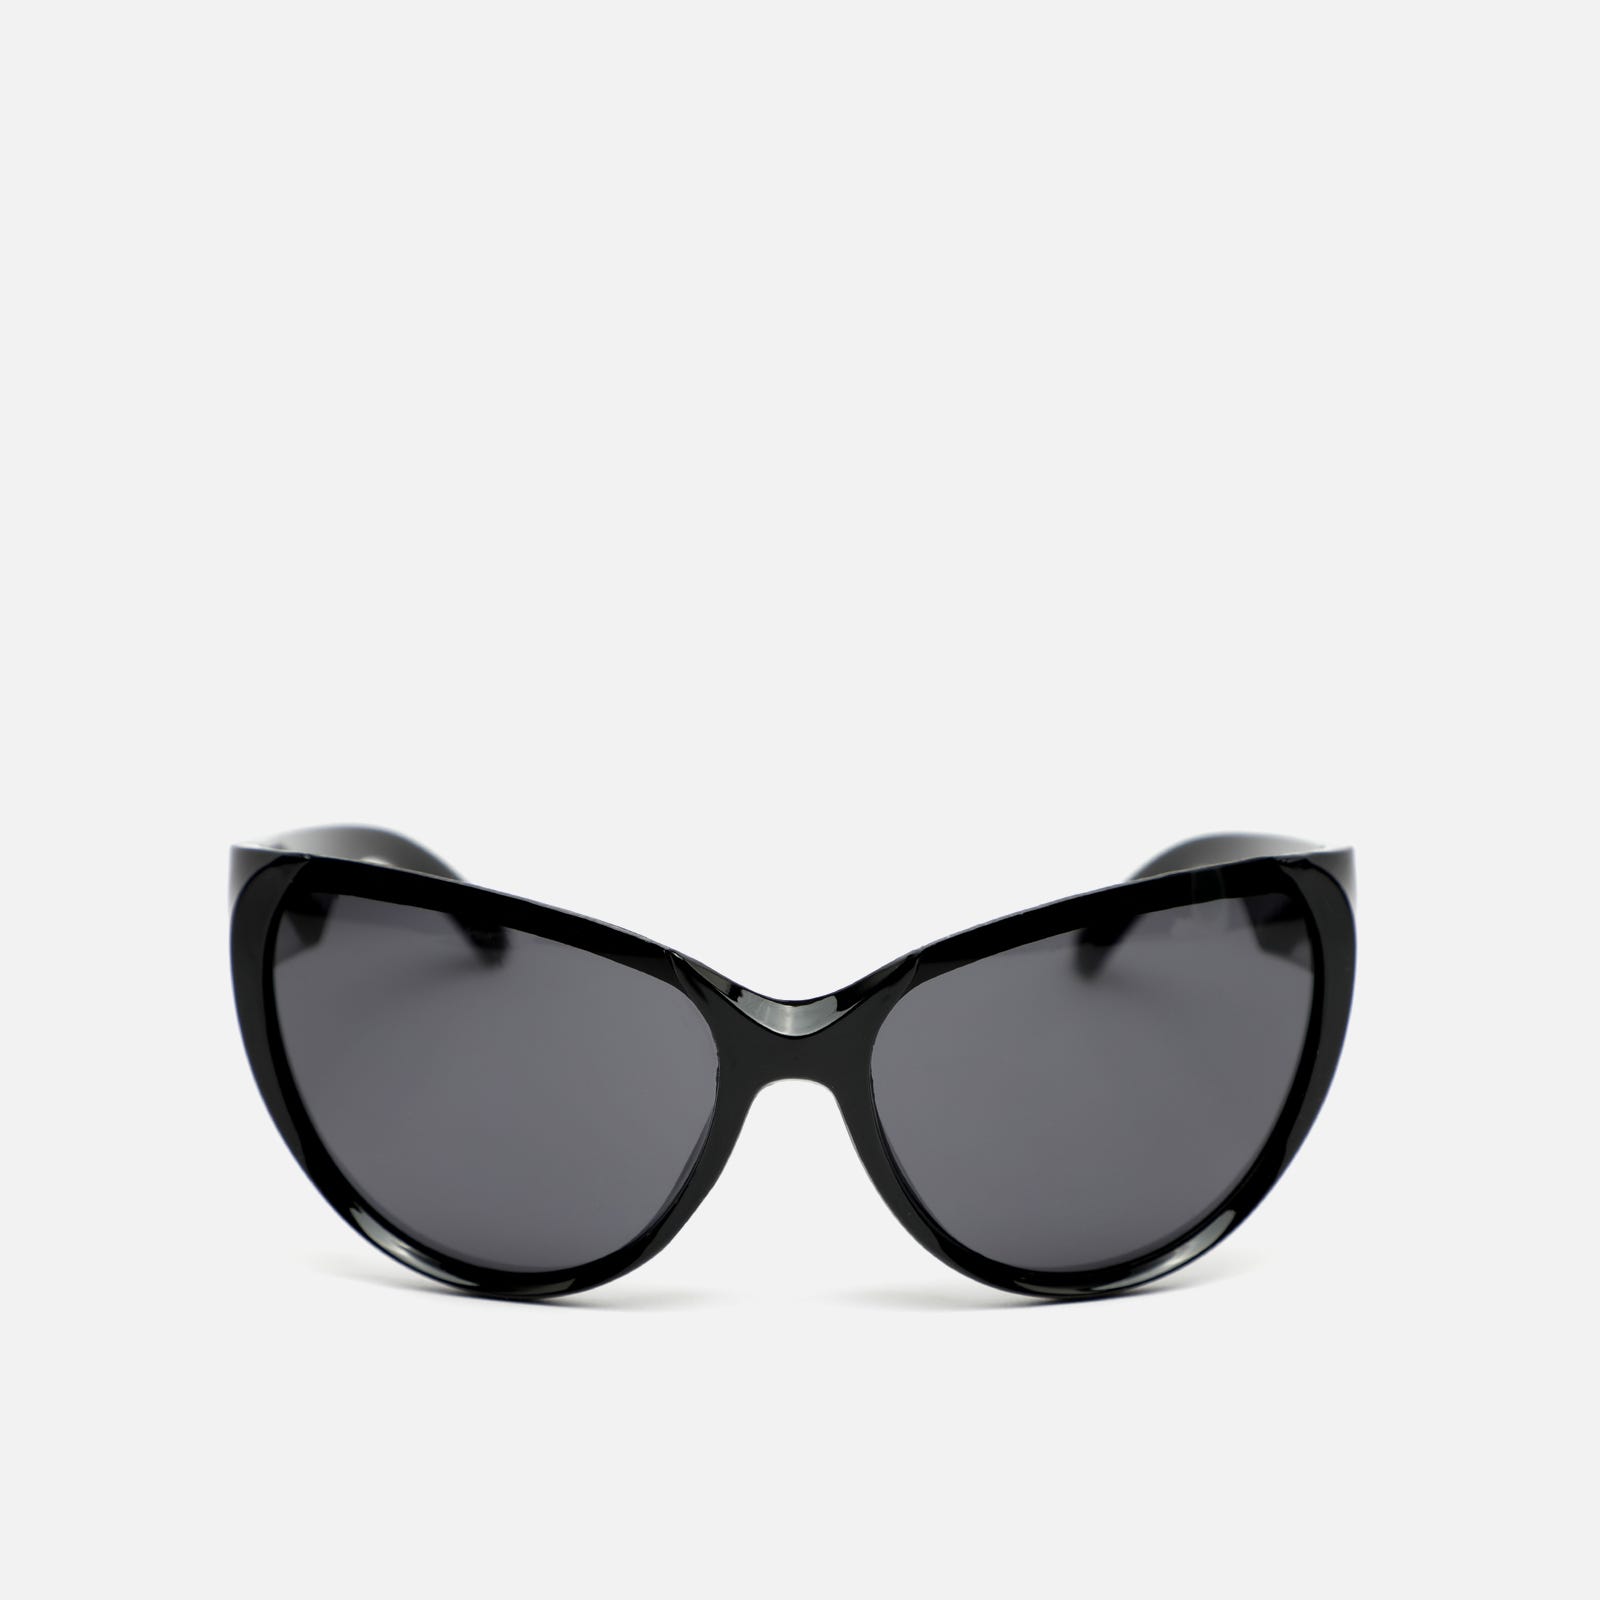 Cat-Eye sunglasses with acetate frames 